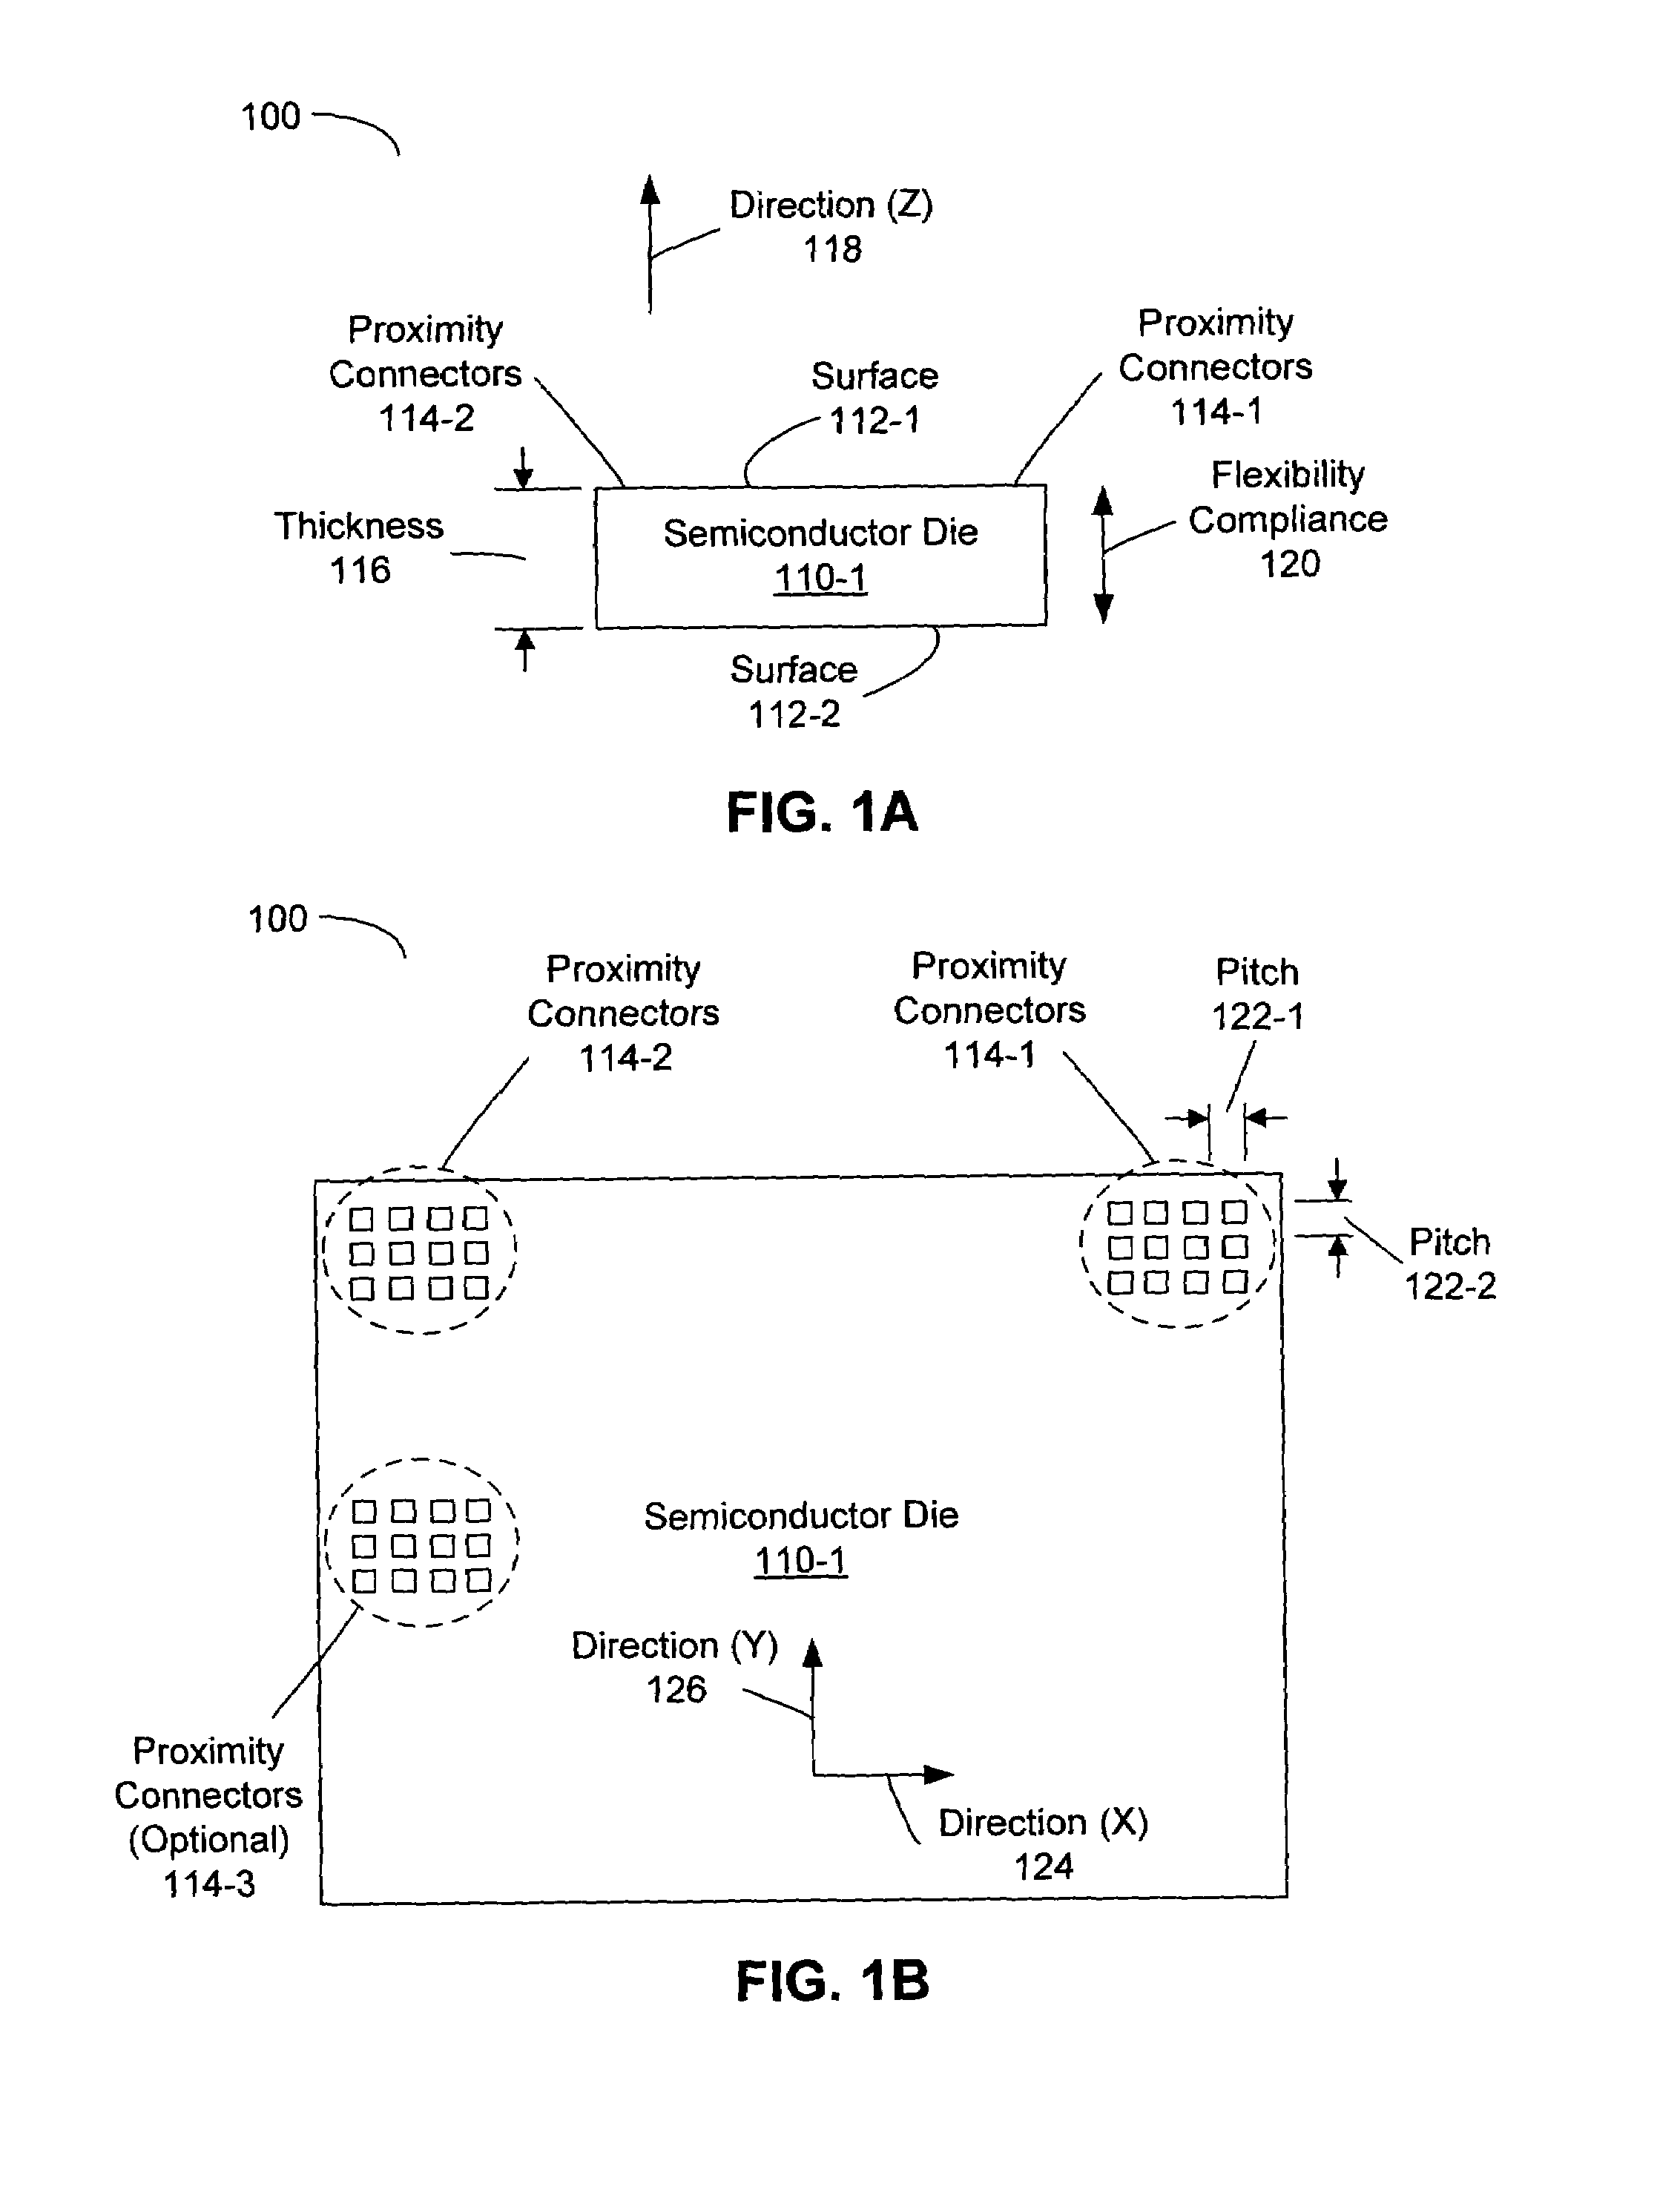 Structures for Z-aligned proximity communication